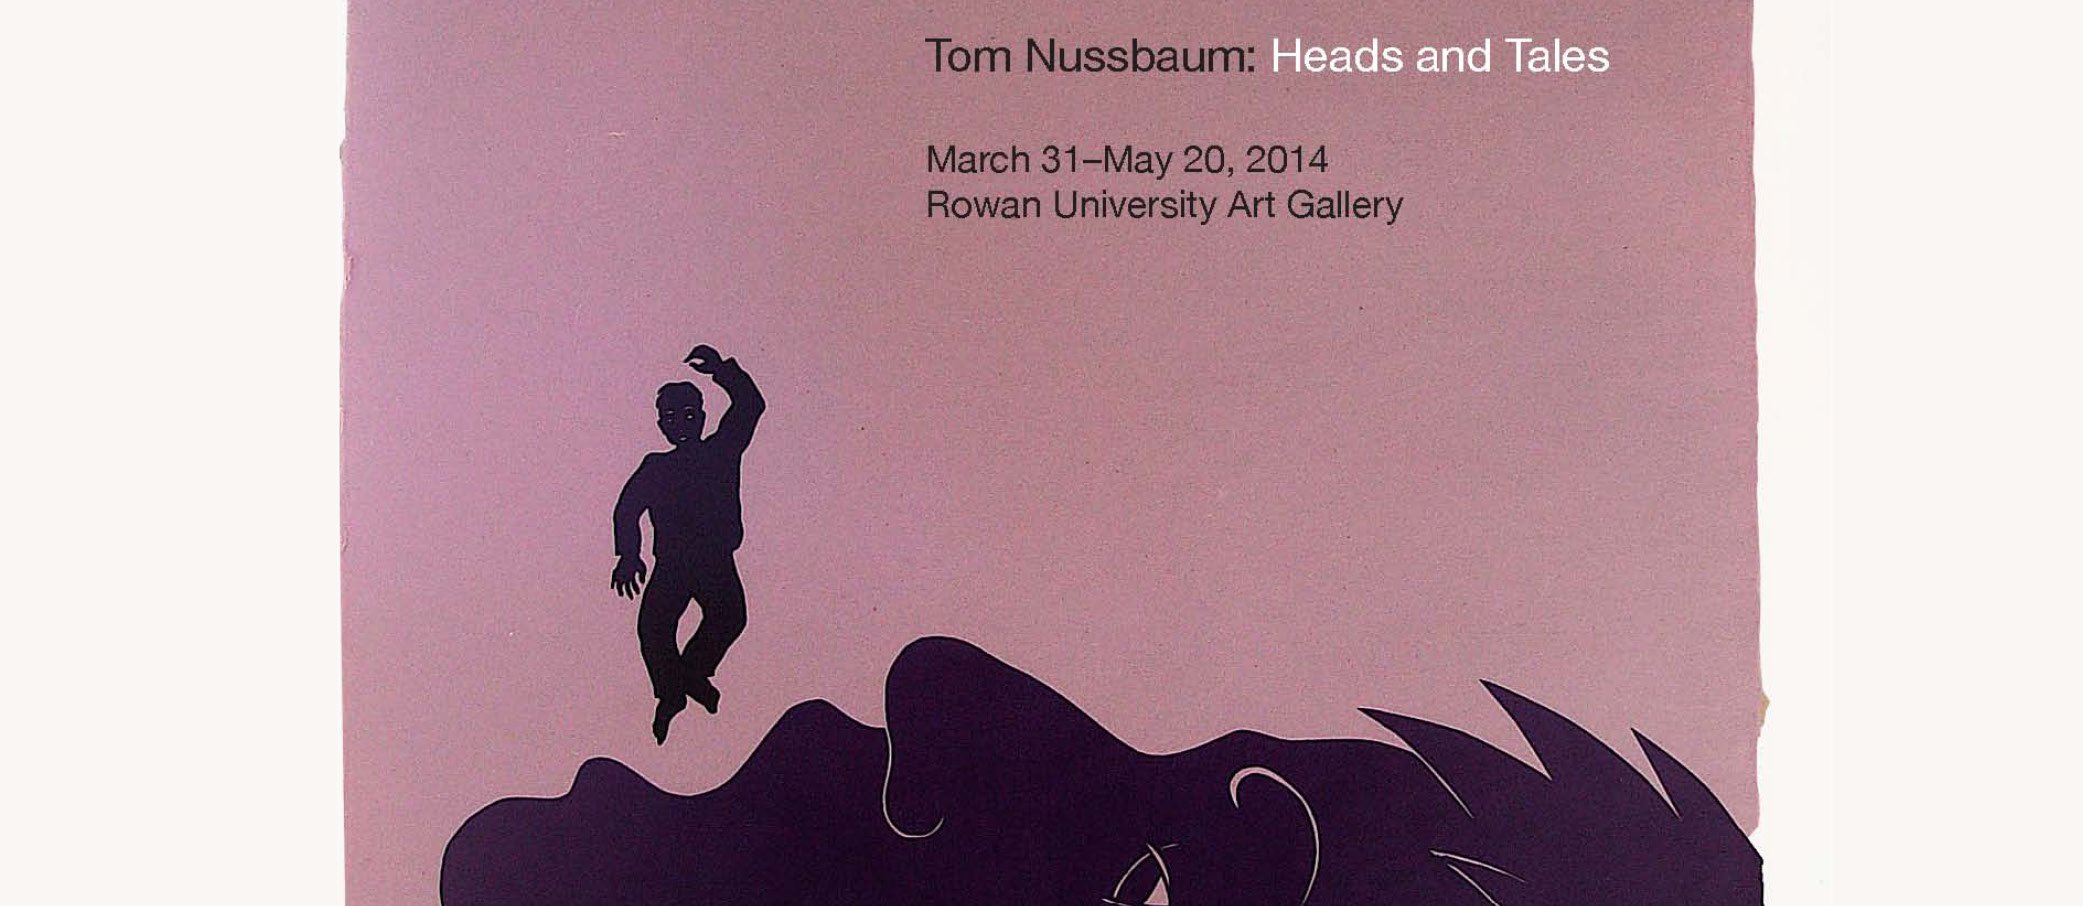 Tom Nussbaum Heads and Tales